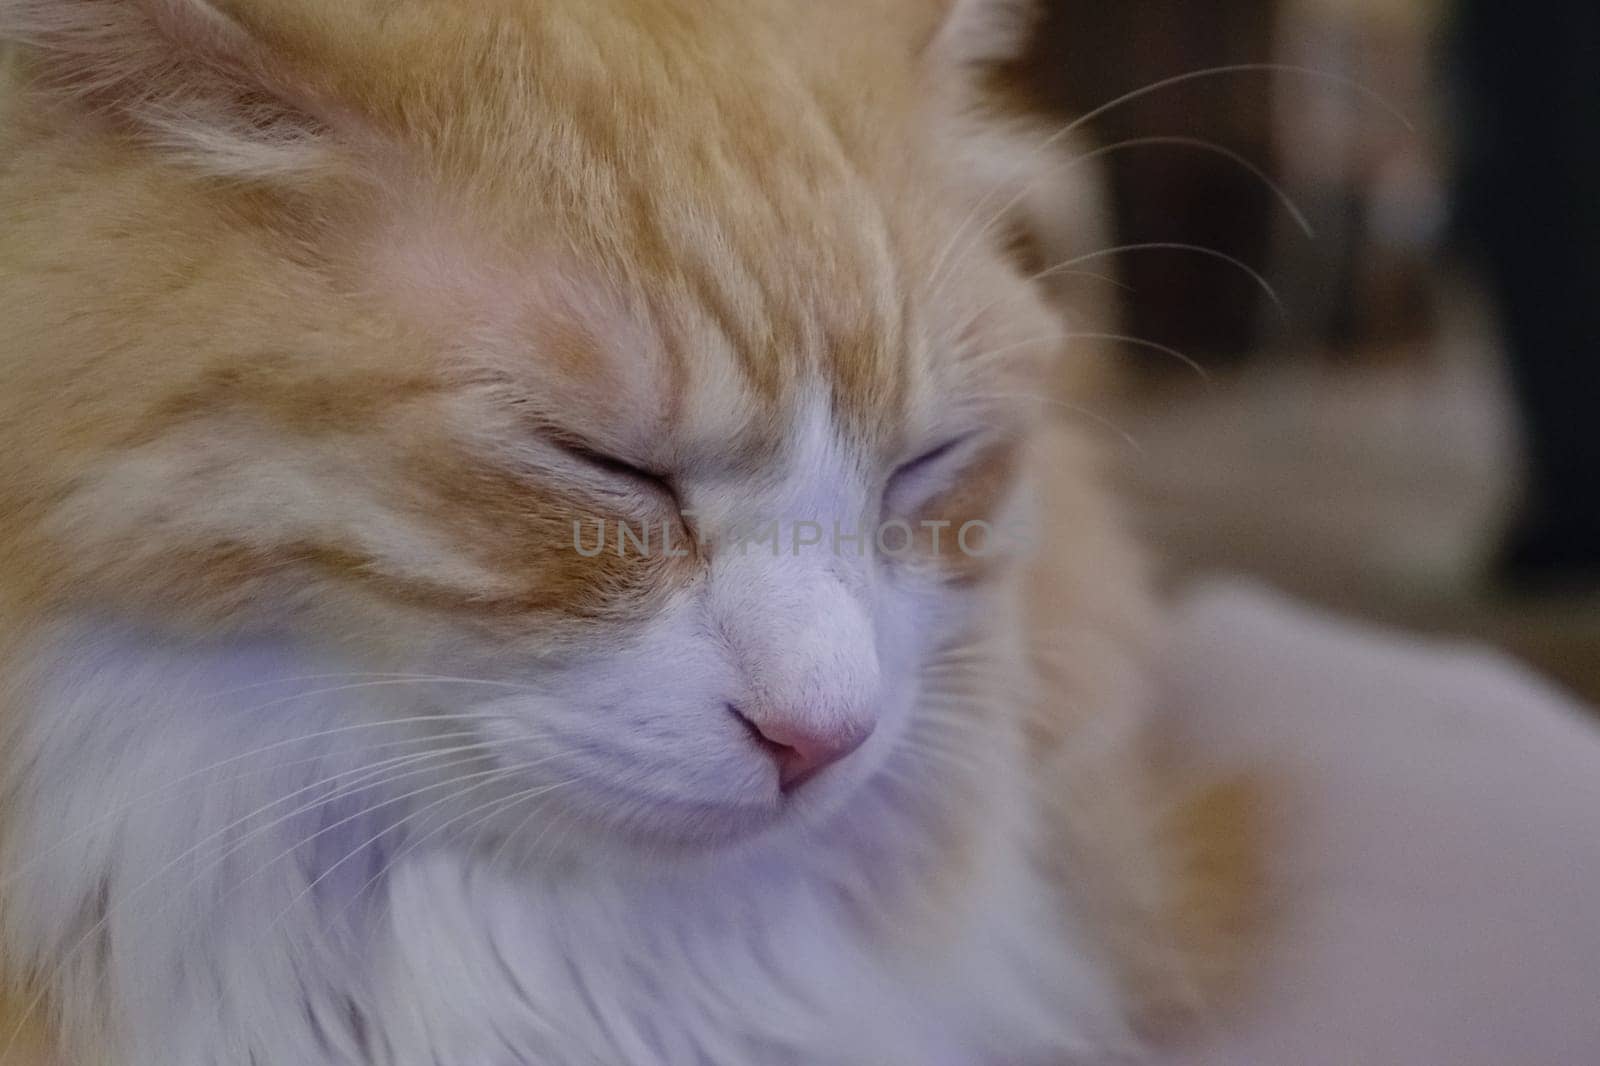 Close-up of a peaceful ginger cat with closed eyes, displaying a serene expression.